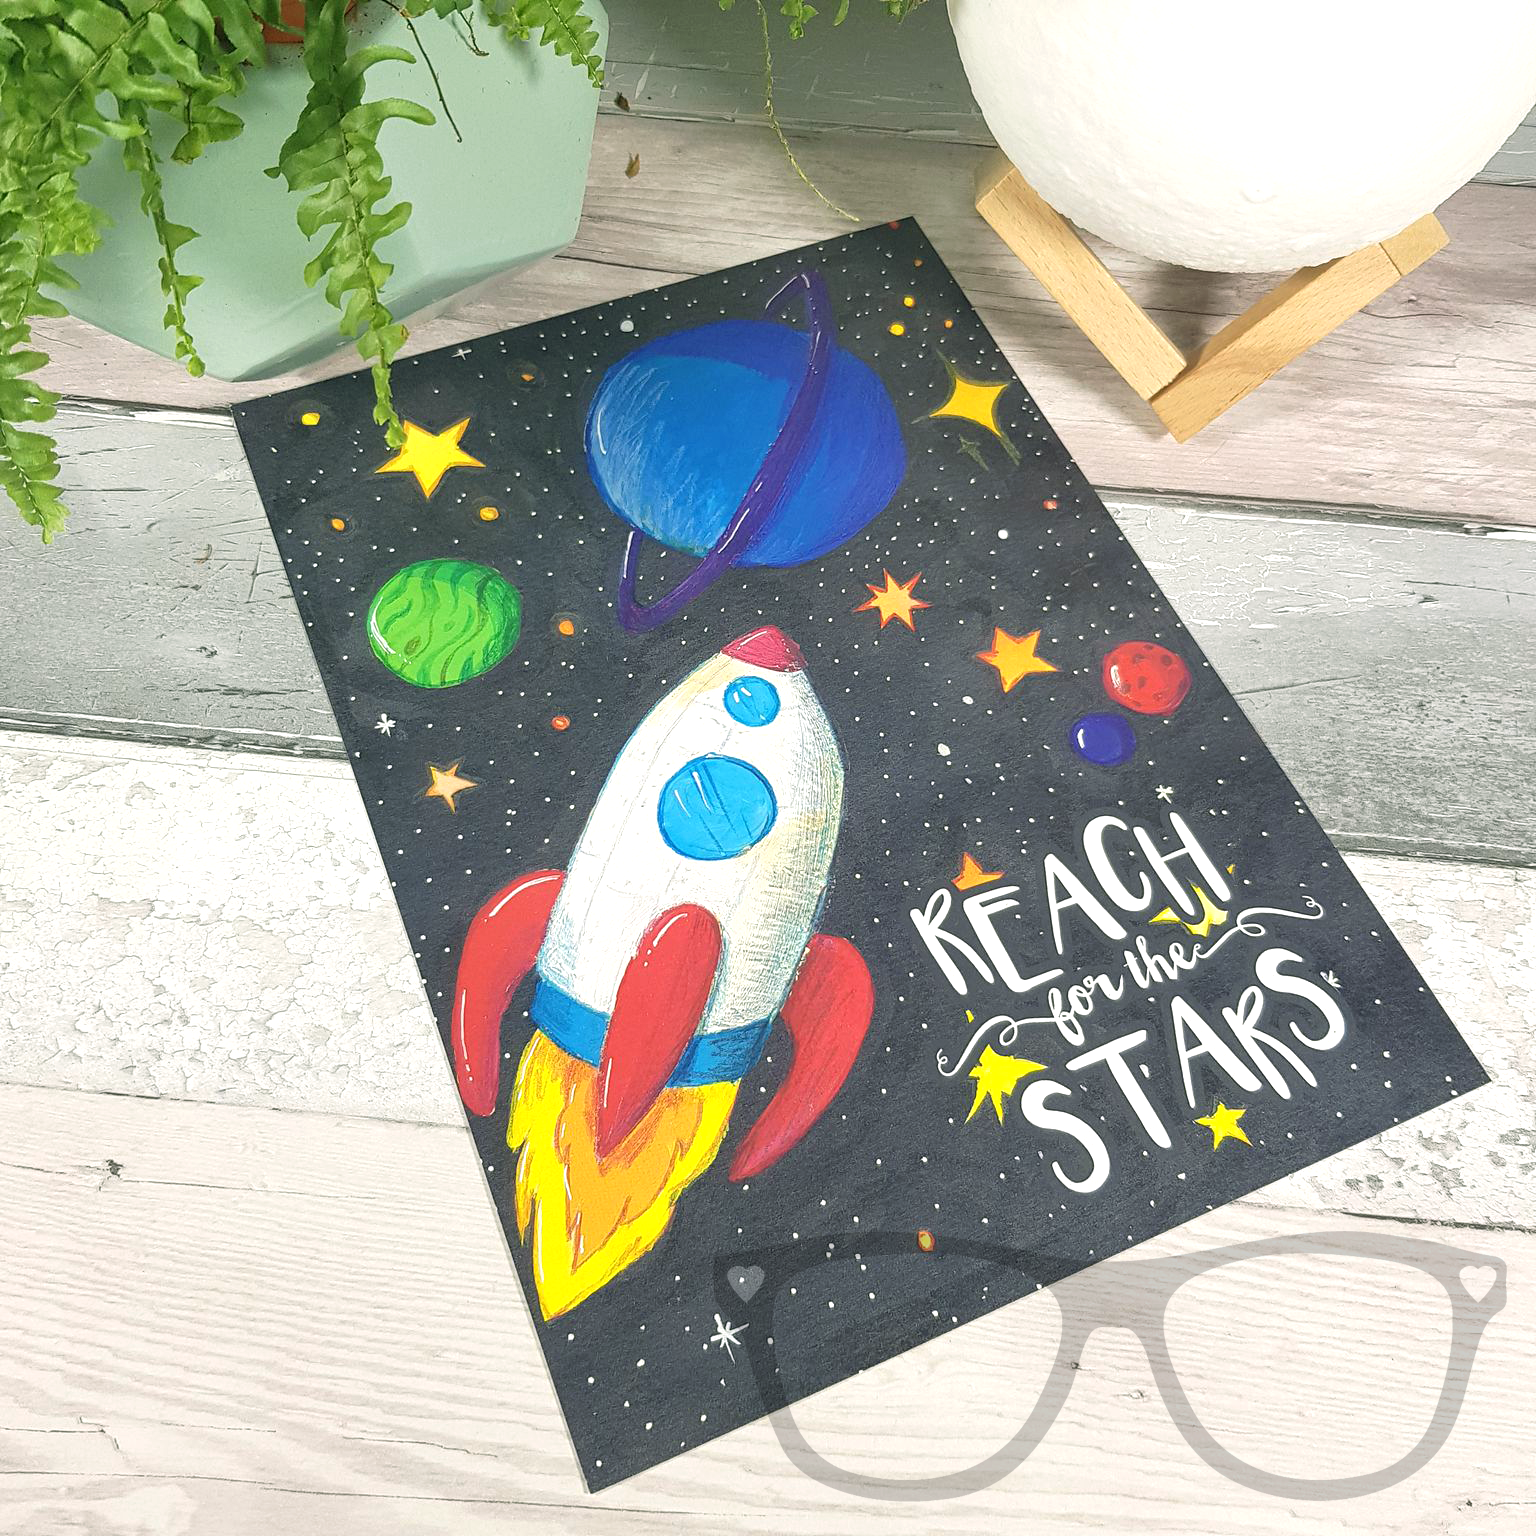 Reach for the stars A4 art print, a digital print of an original illustration showing a white rocket shooting through space with p[lanets and stars. The text reads "Reach for the stars"